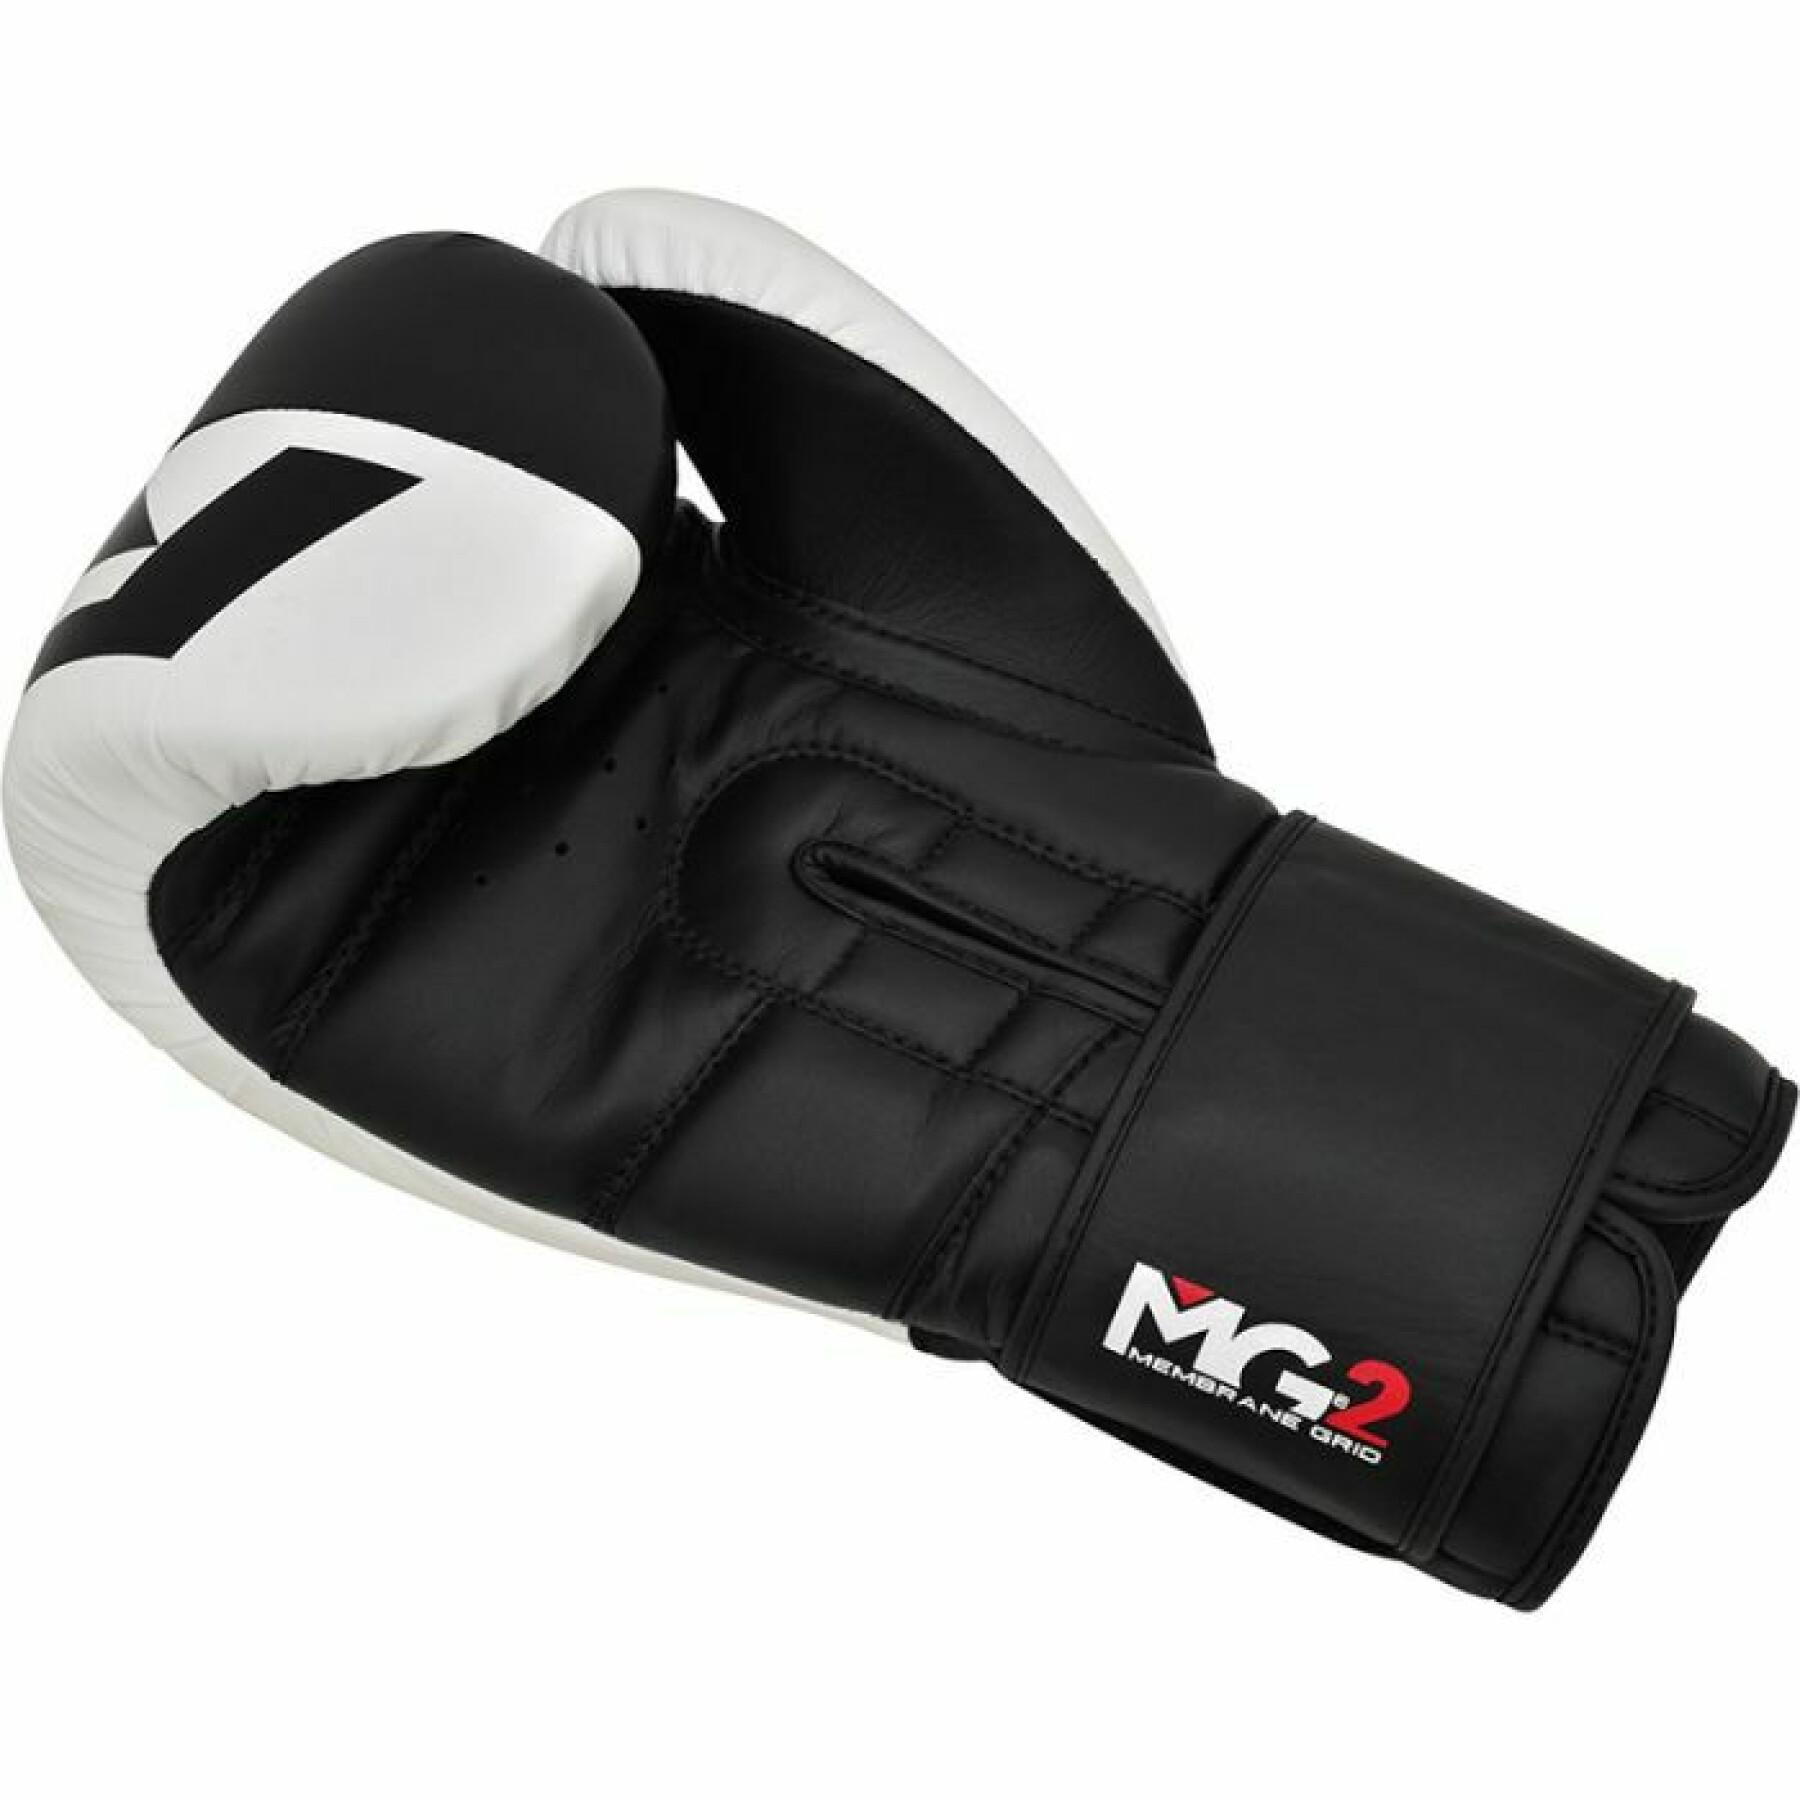 Boxing gloves RDX S4